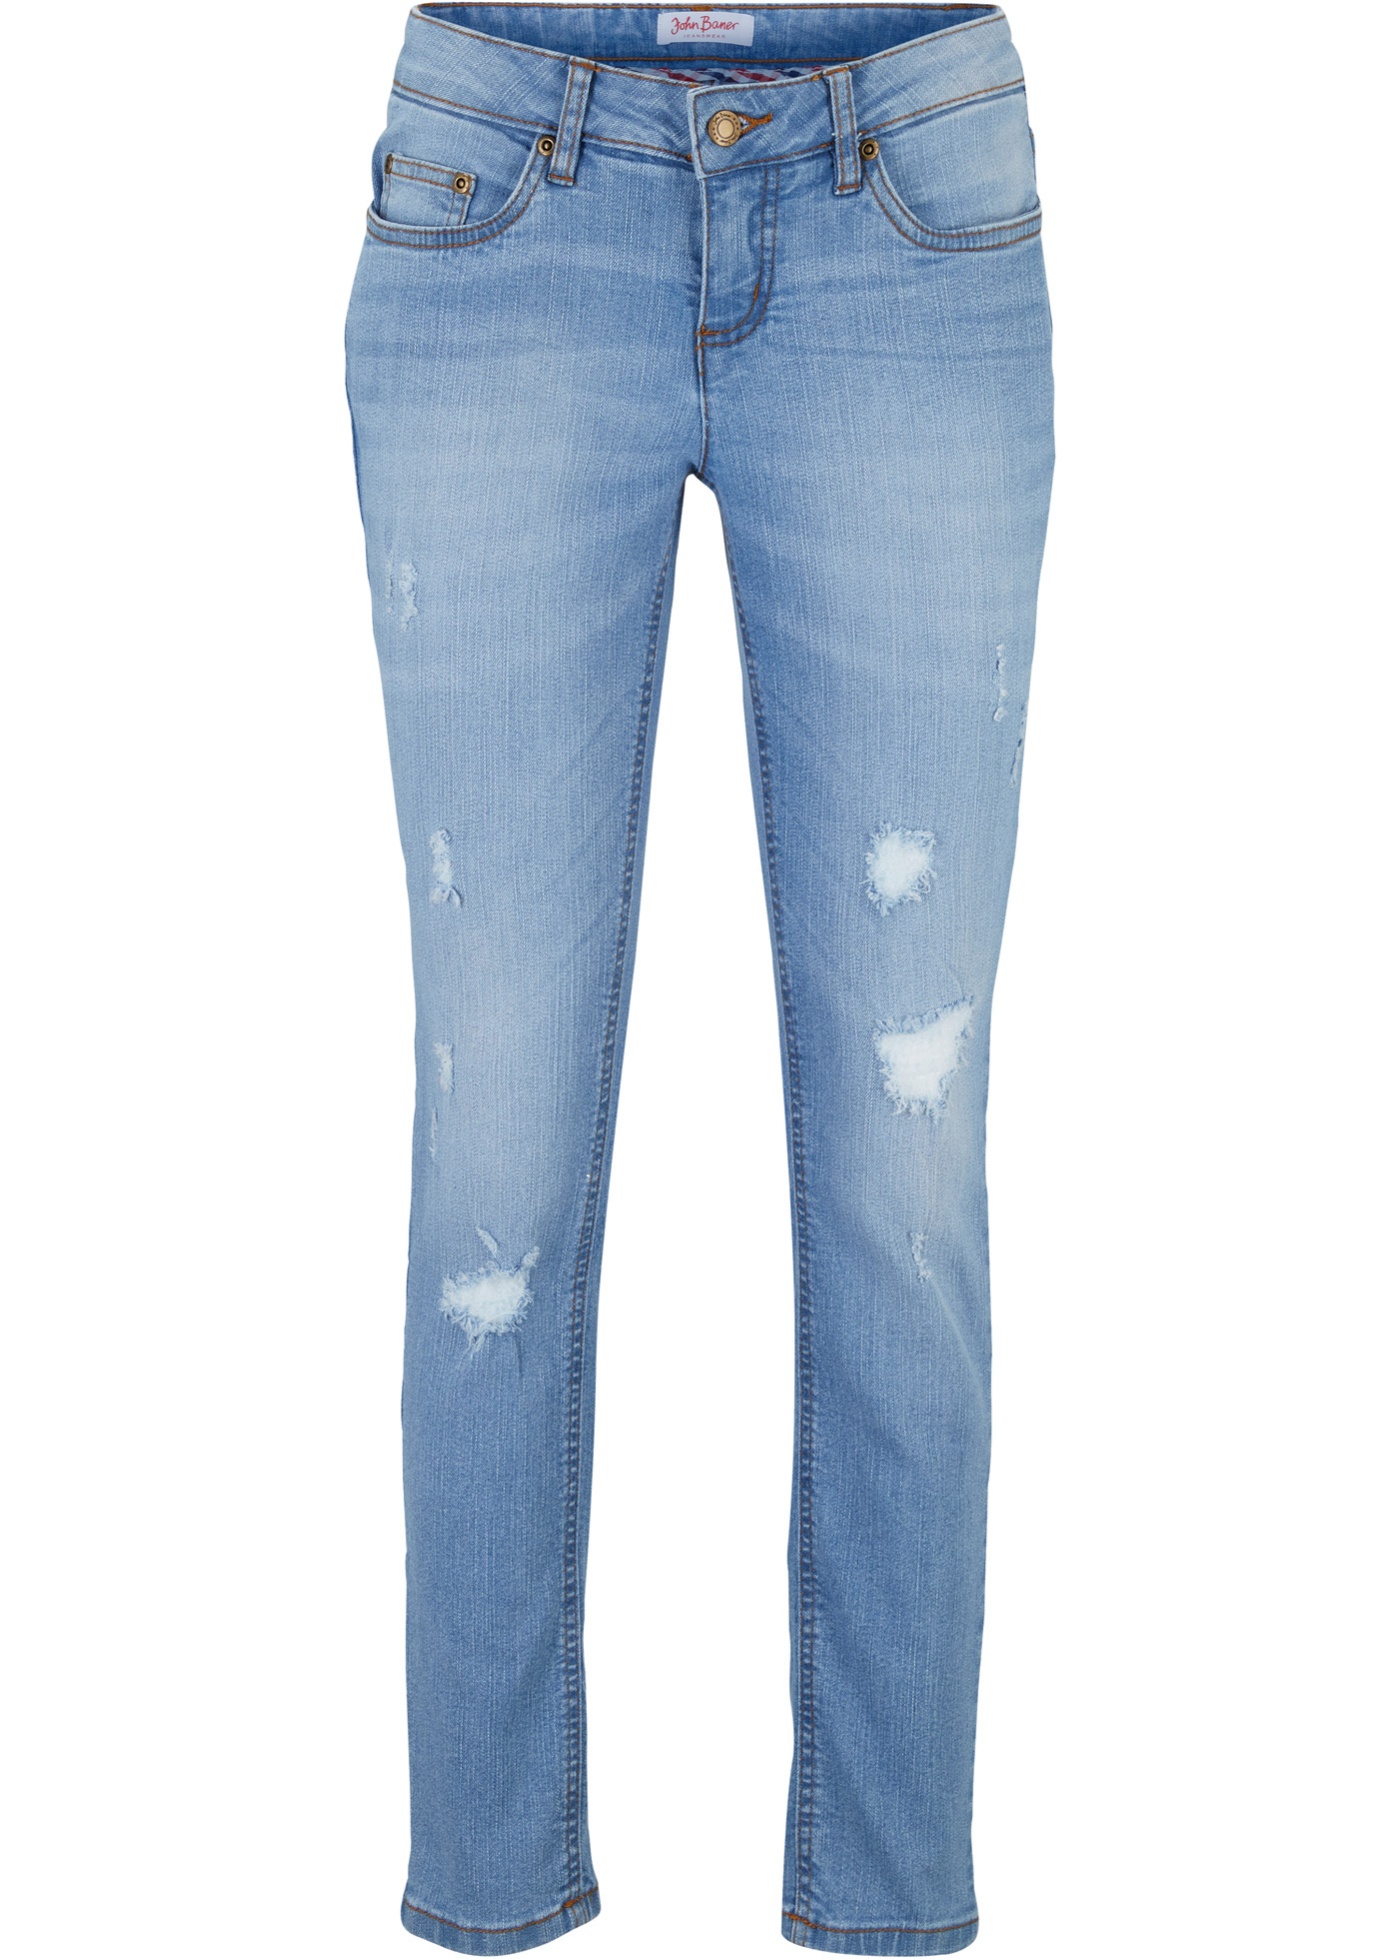 jean extensible confort-stretch, skinny